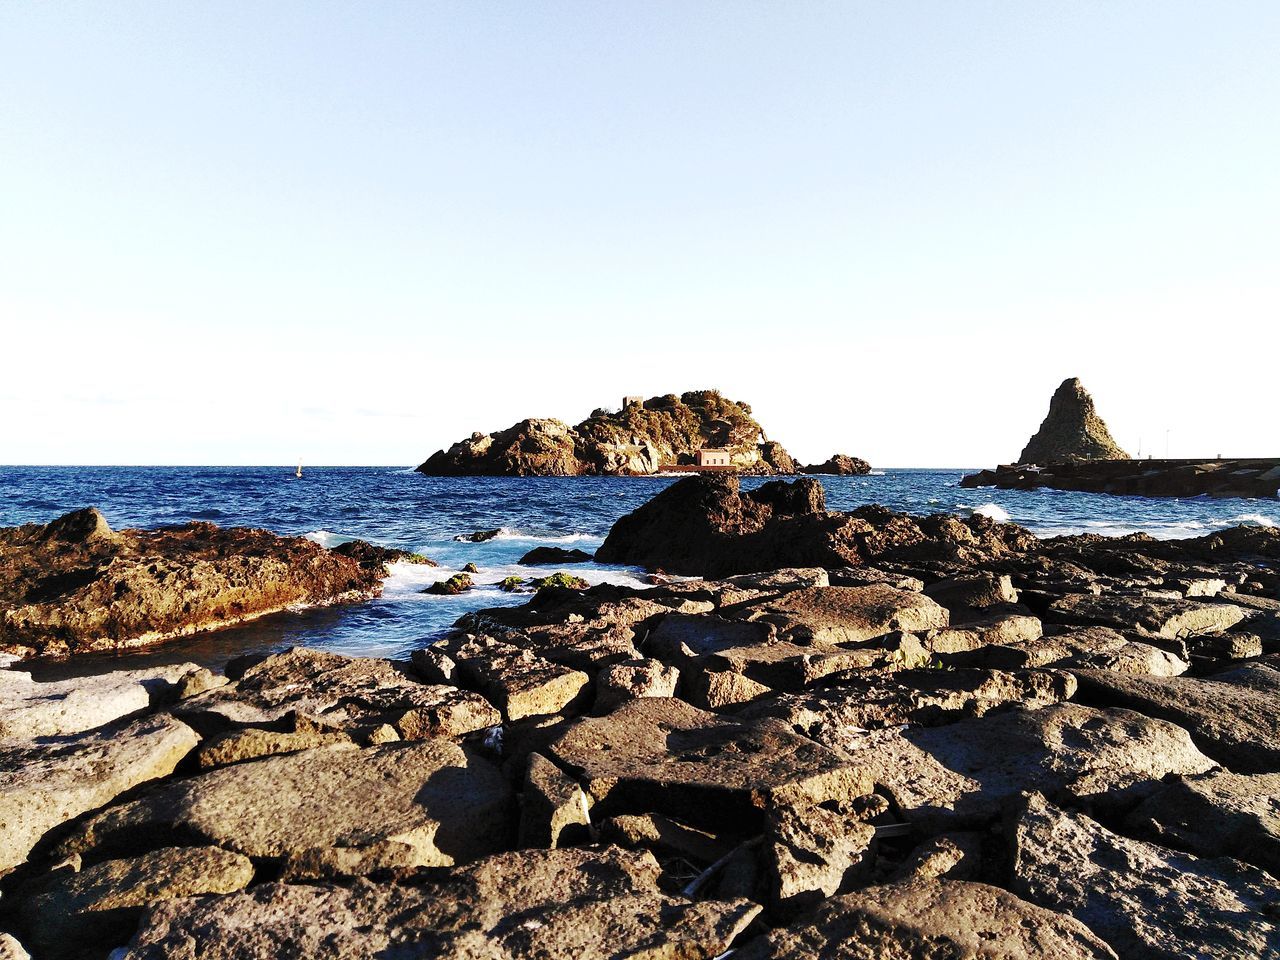 VIEW OF ROCKS ON BEACH AGAINST CLEAR SKY